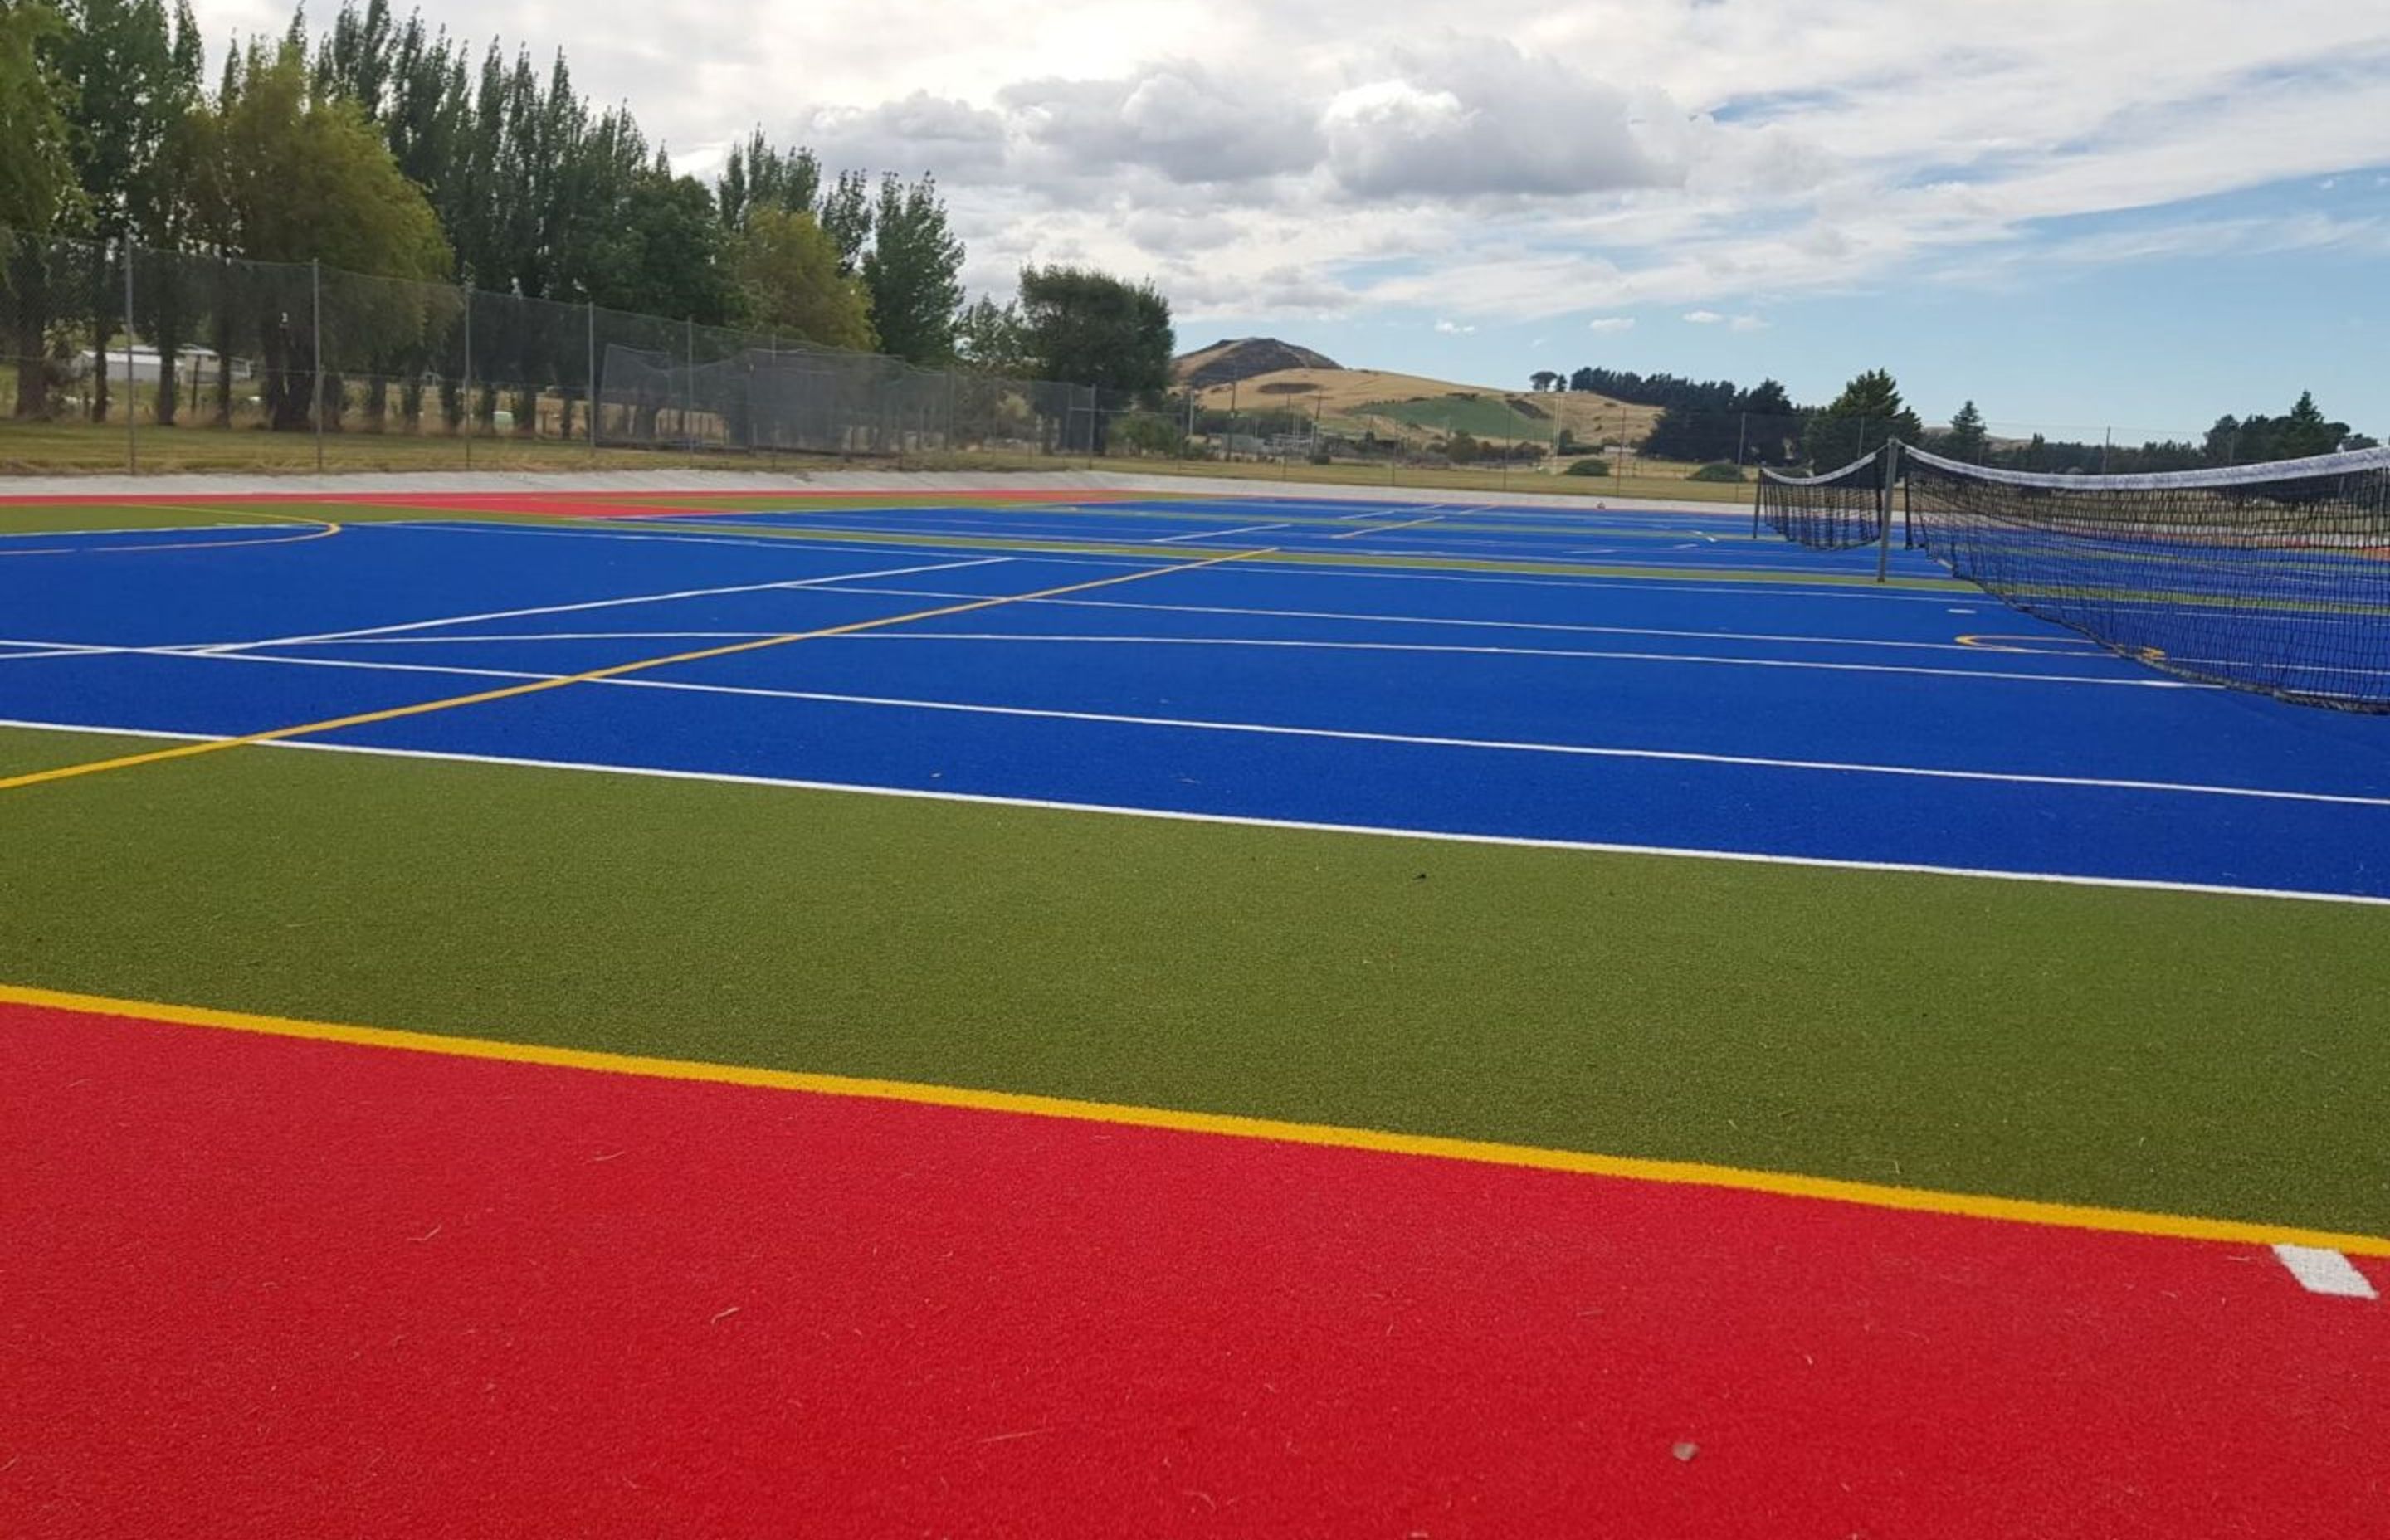 Northern Southland College get the TigerTurf Advantage